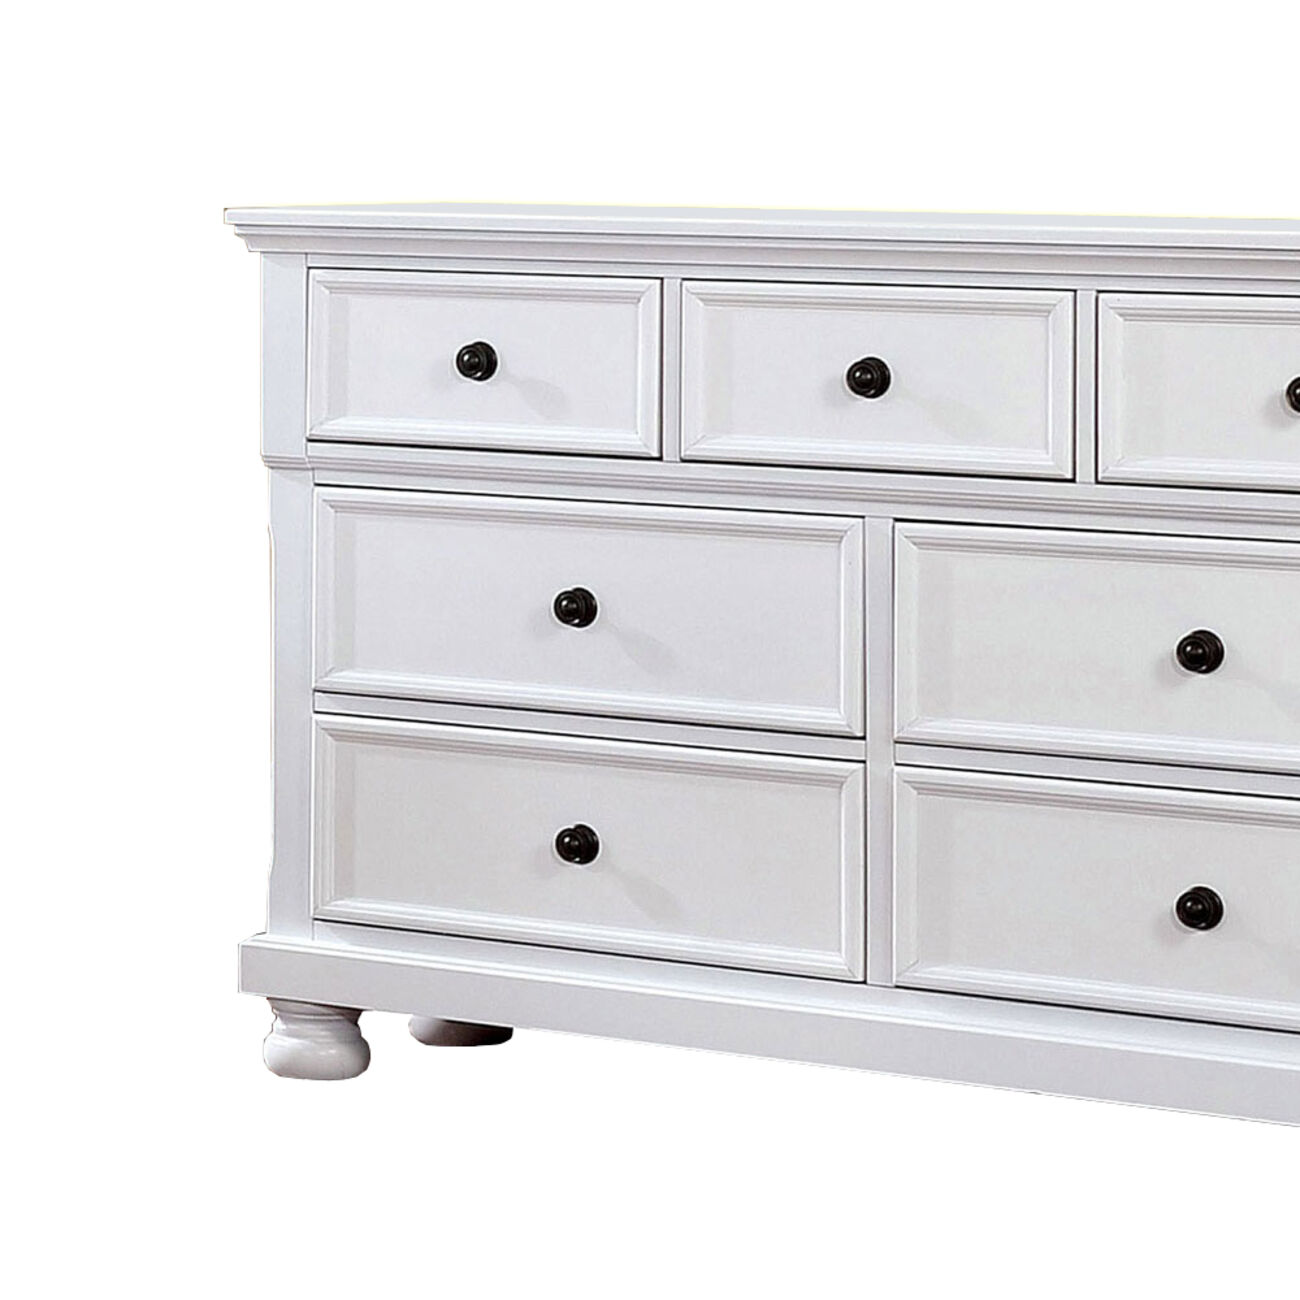 Transitional Wooden Dresser with 7 Drawers and Bun Feet, White